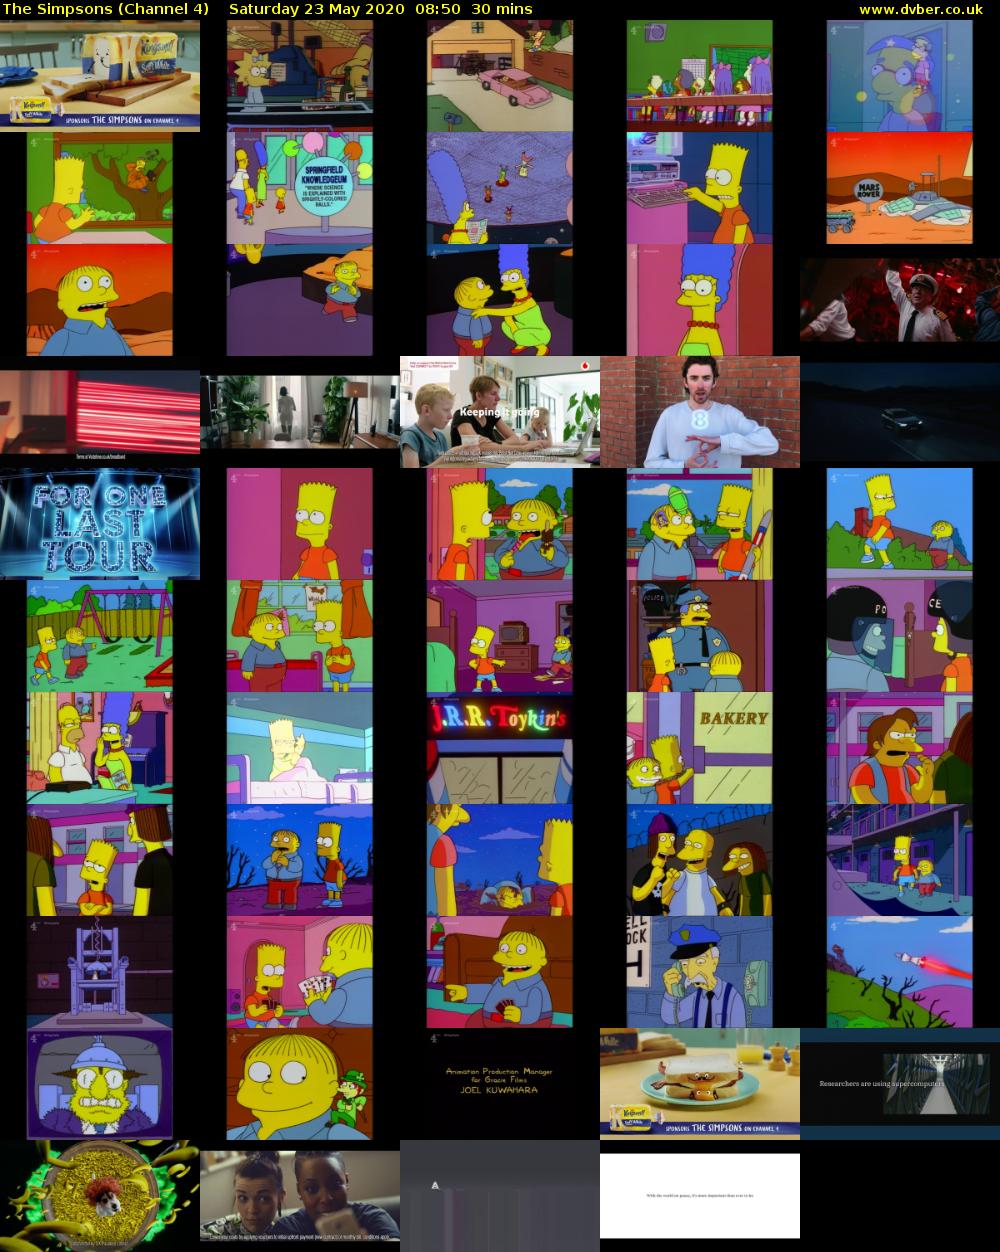 The Simpsons (Channel 4) Saturday 23 May 2020 08:50 - 09:20